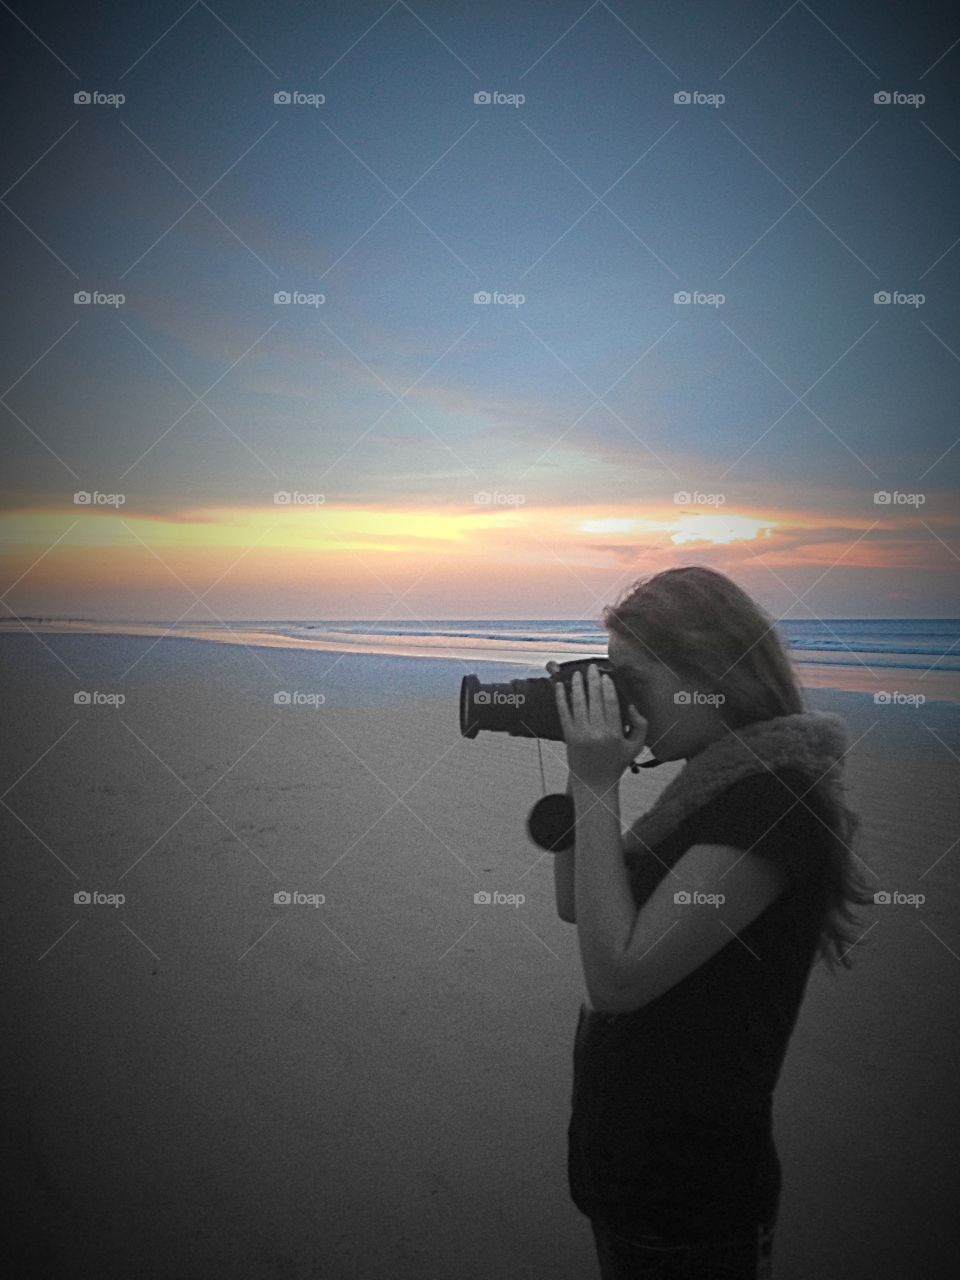 Photographer in training. My Beautiful niece too my camera and started shooting during the sunset at the beach